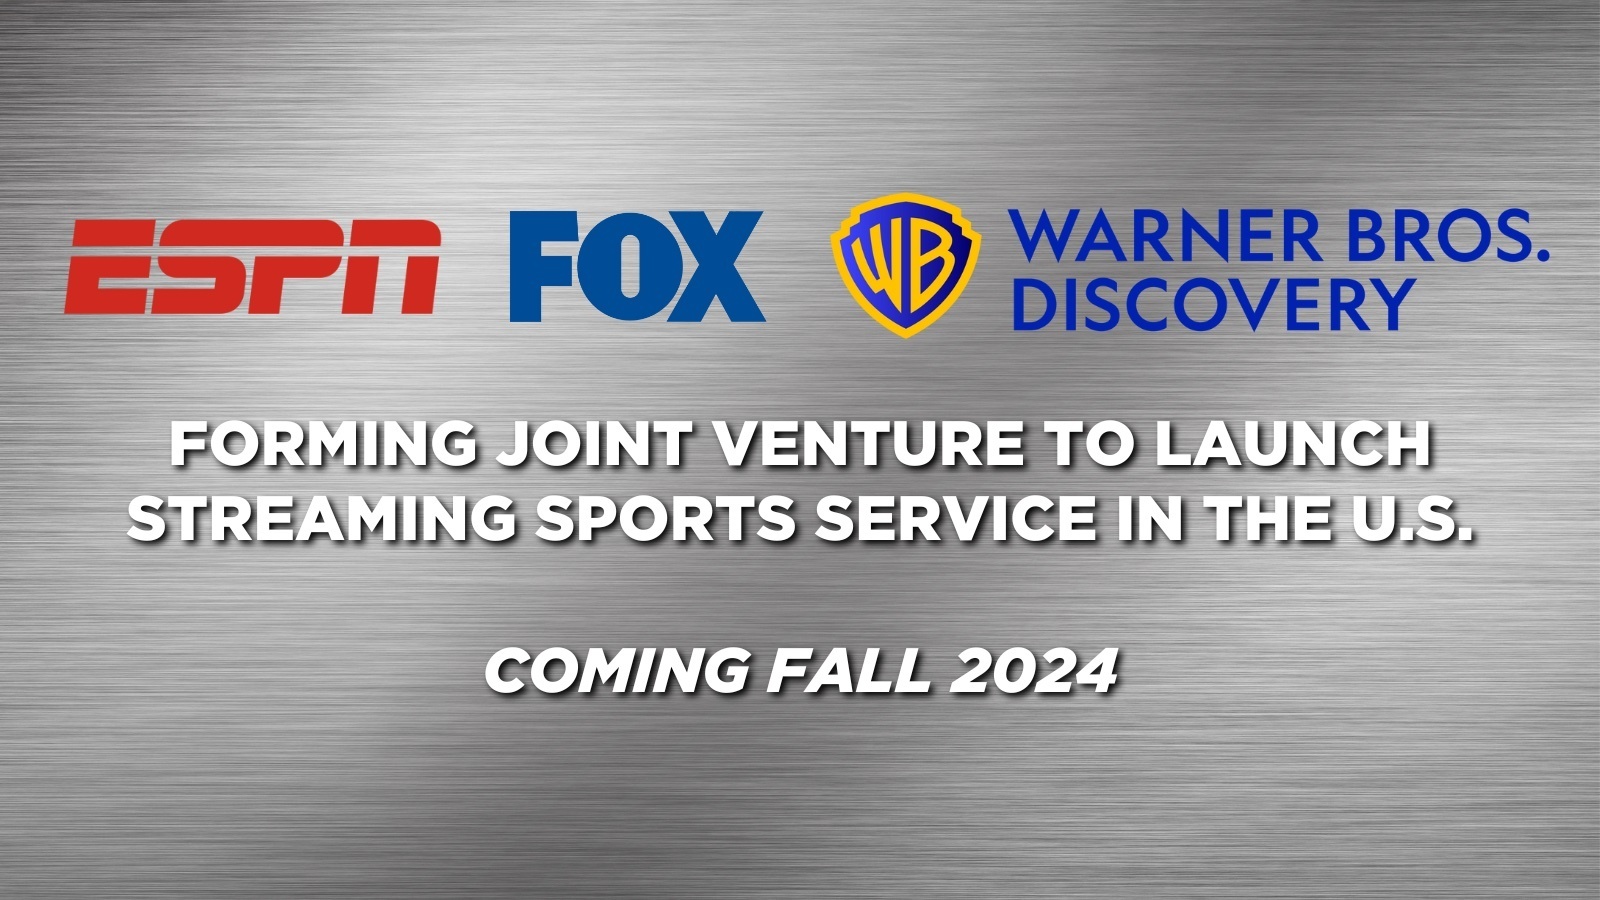 ESPN, FOX and Warner Bros. Discovery Forming Joint Venture to Launch  Streaming Sports Service in the U.S.